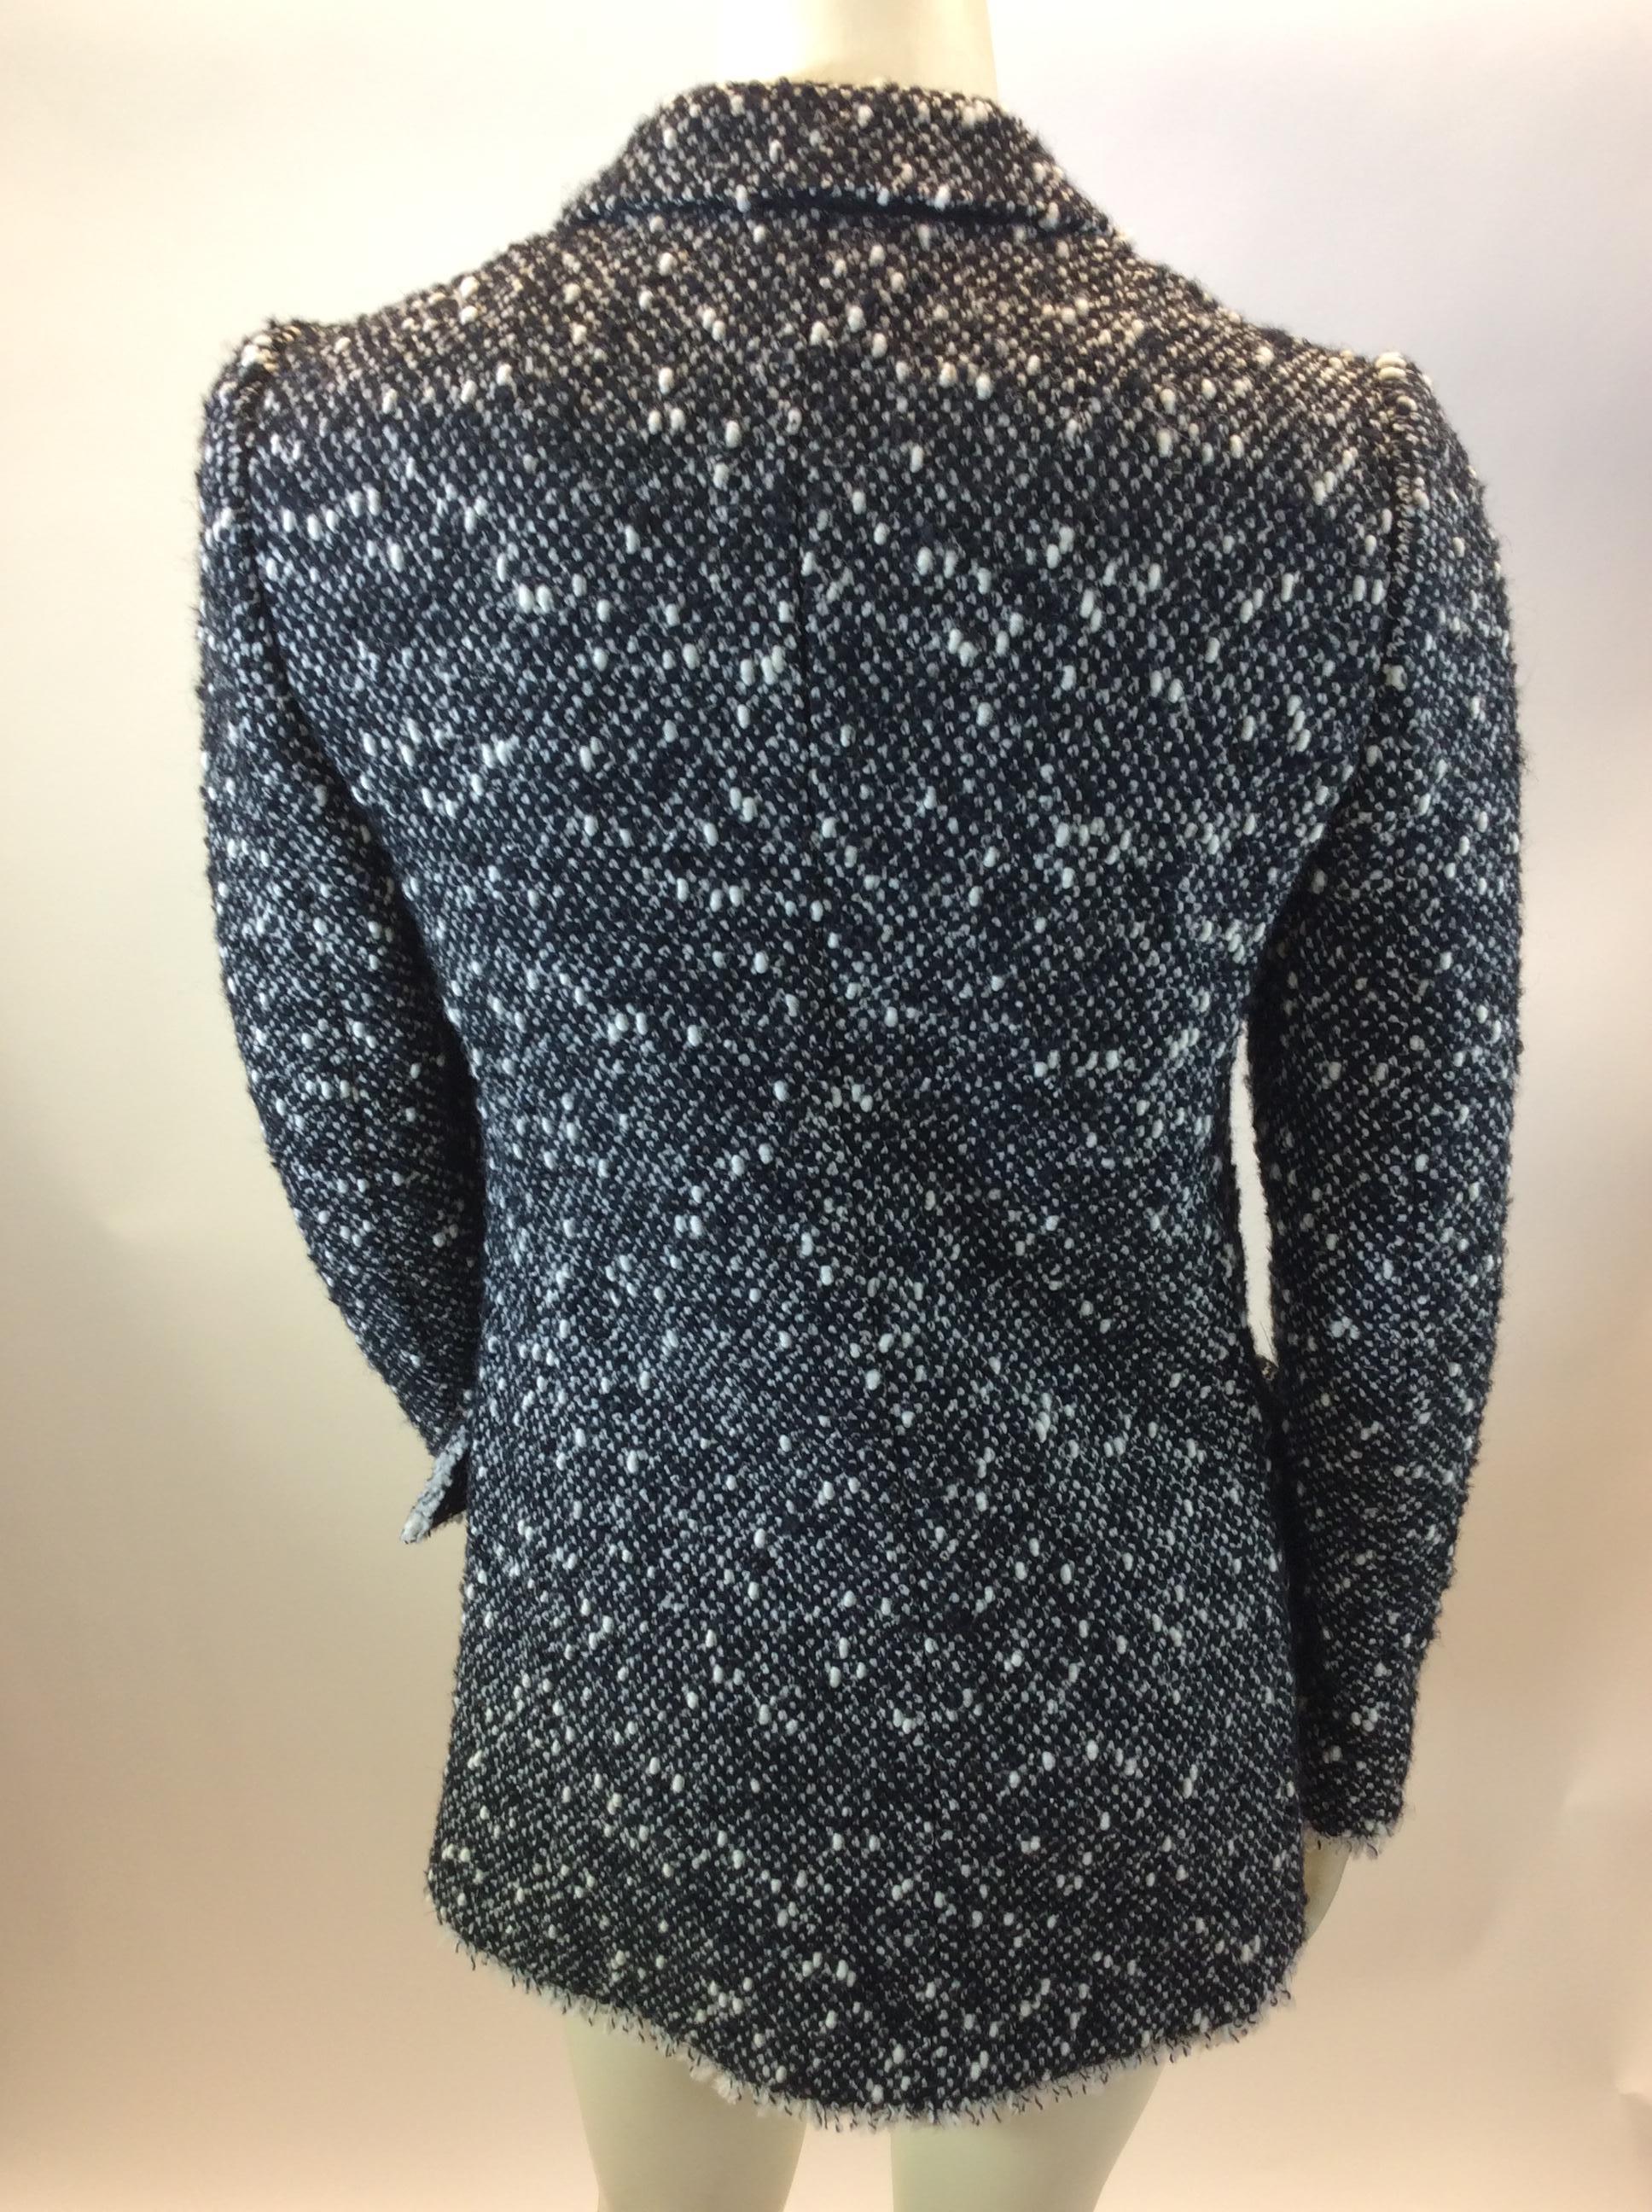 Dolce & Gabbana Black and White Wool Blazer In Good Condition For Sale In Narberth, PA